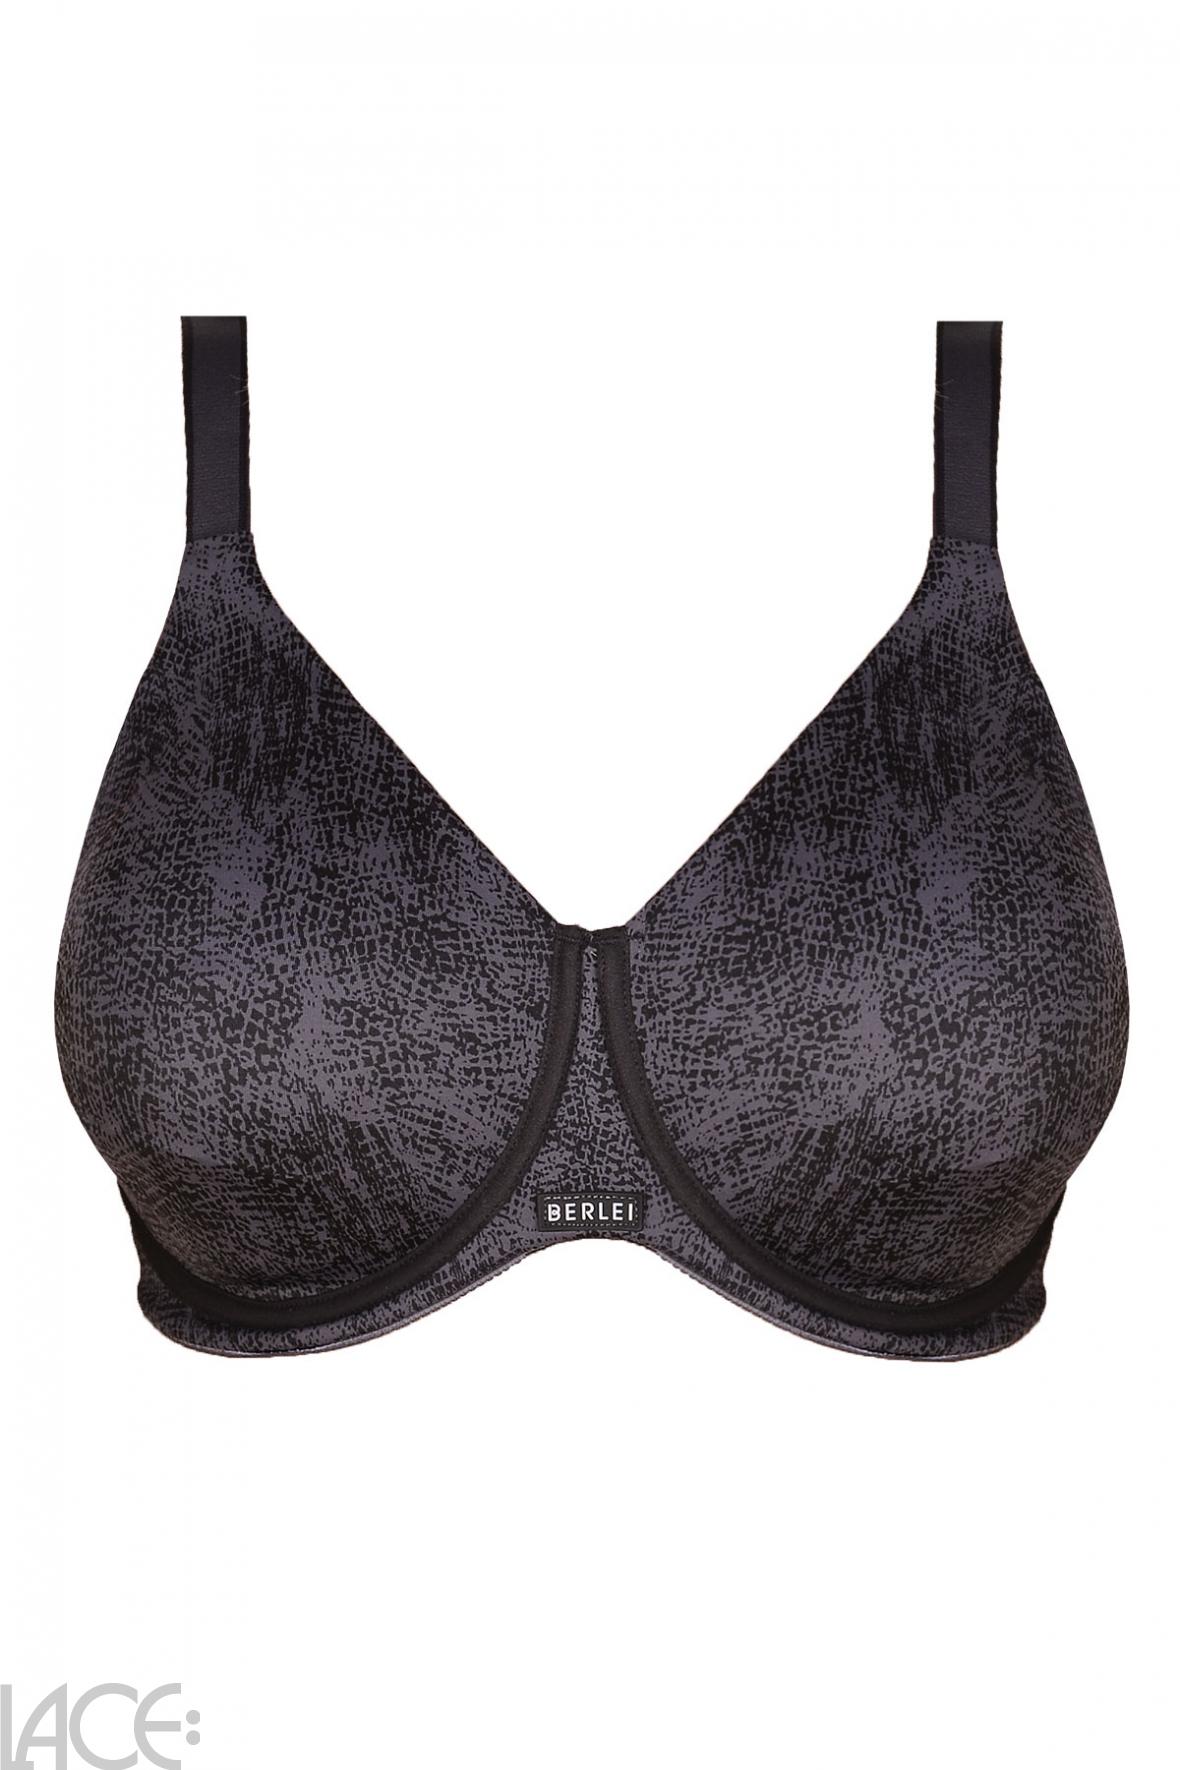 Berlei High Performance Underwired Sports bra E-G cup – Lace-Lingerie.com